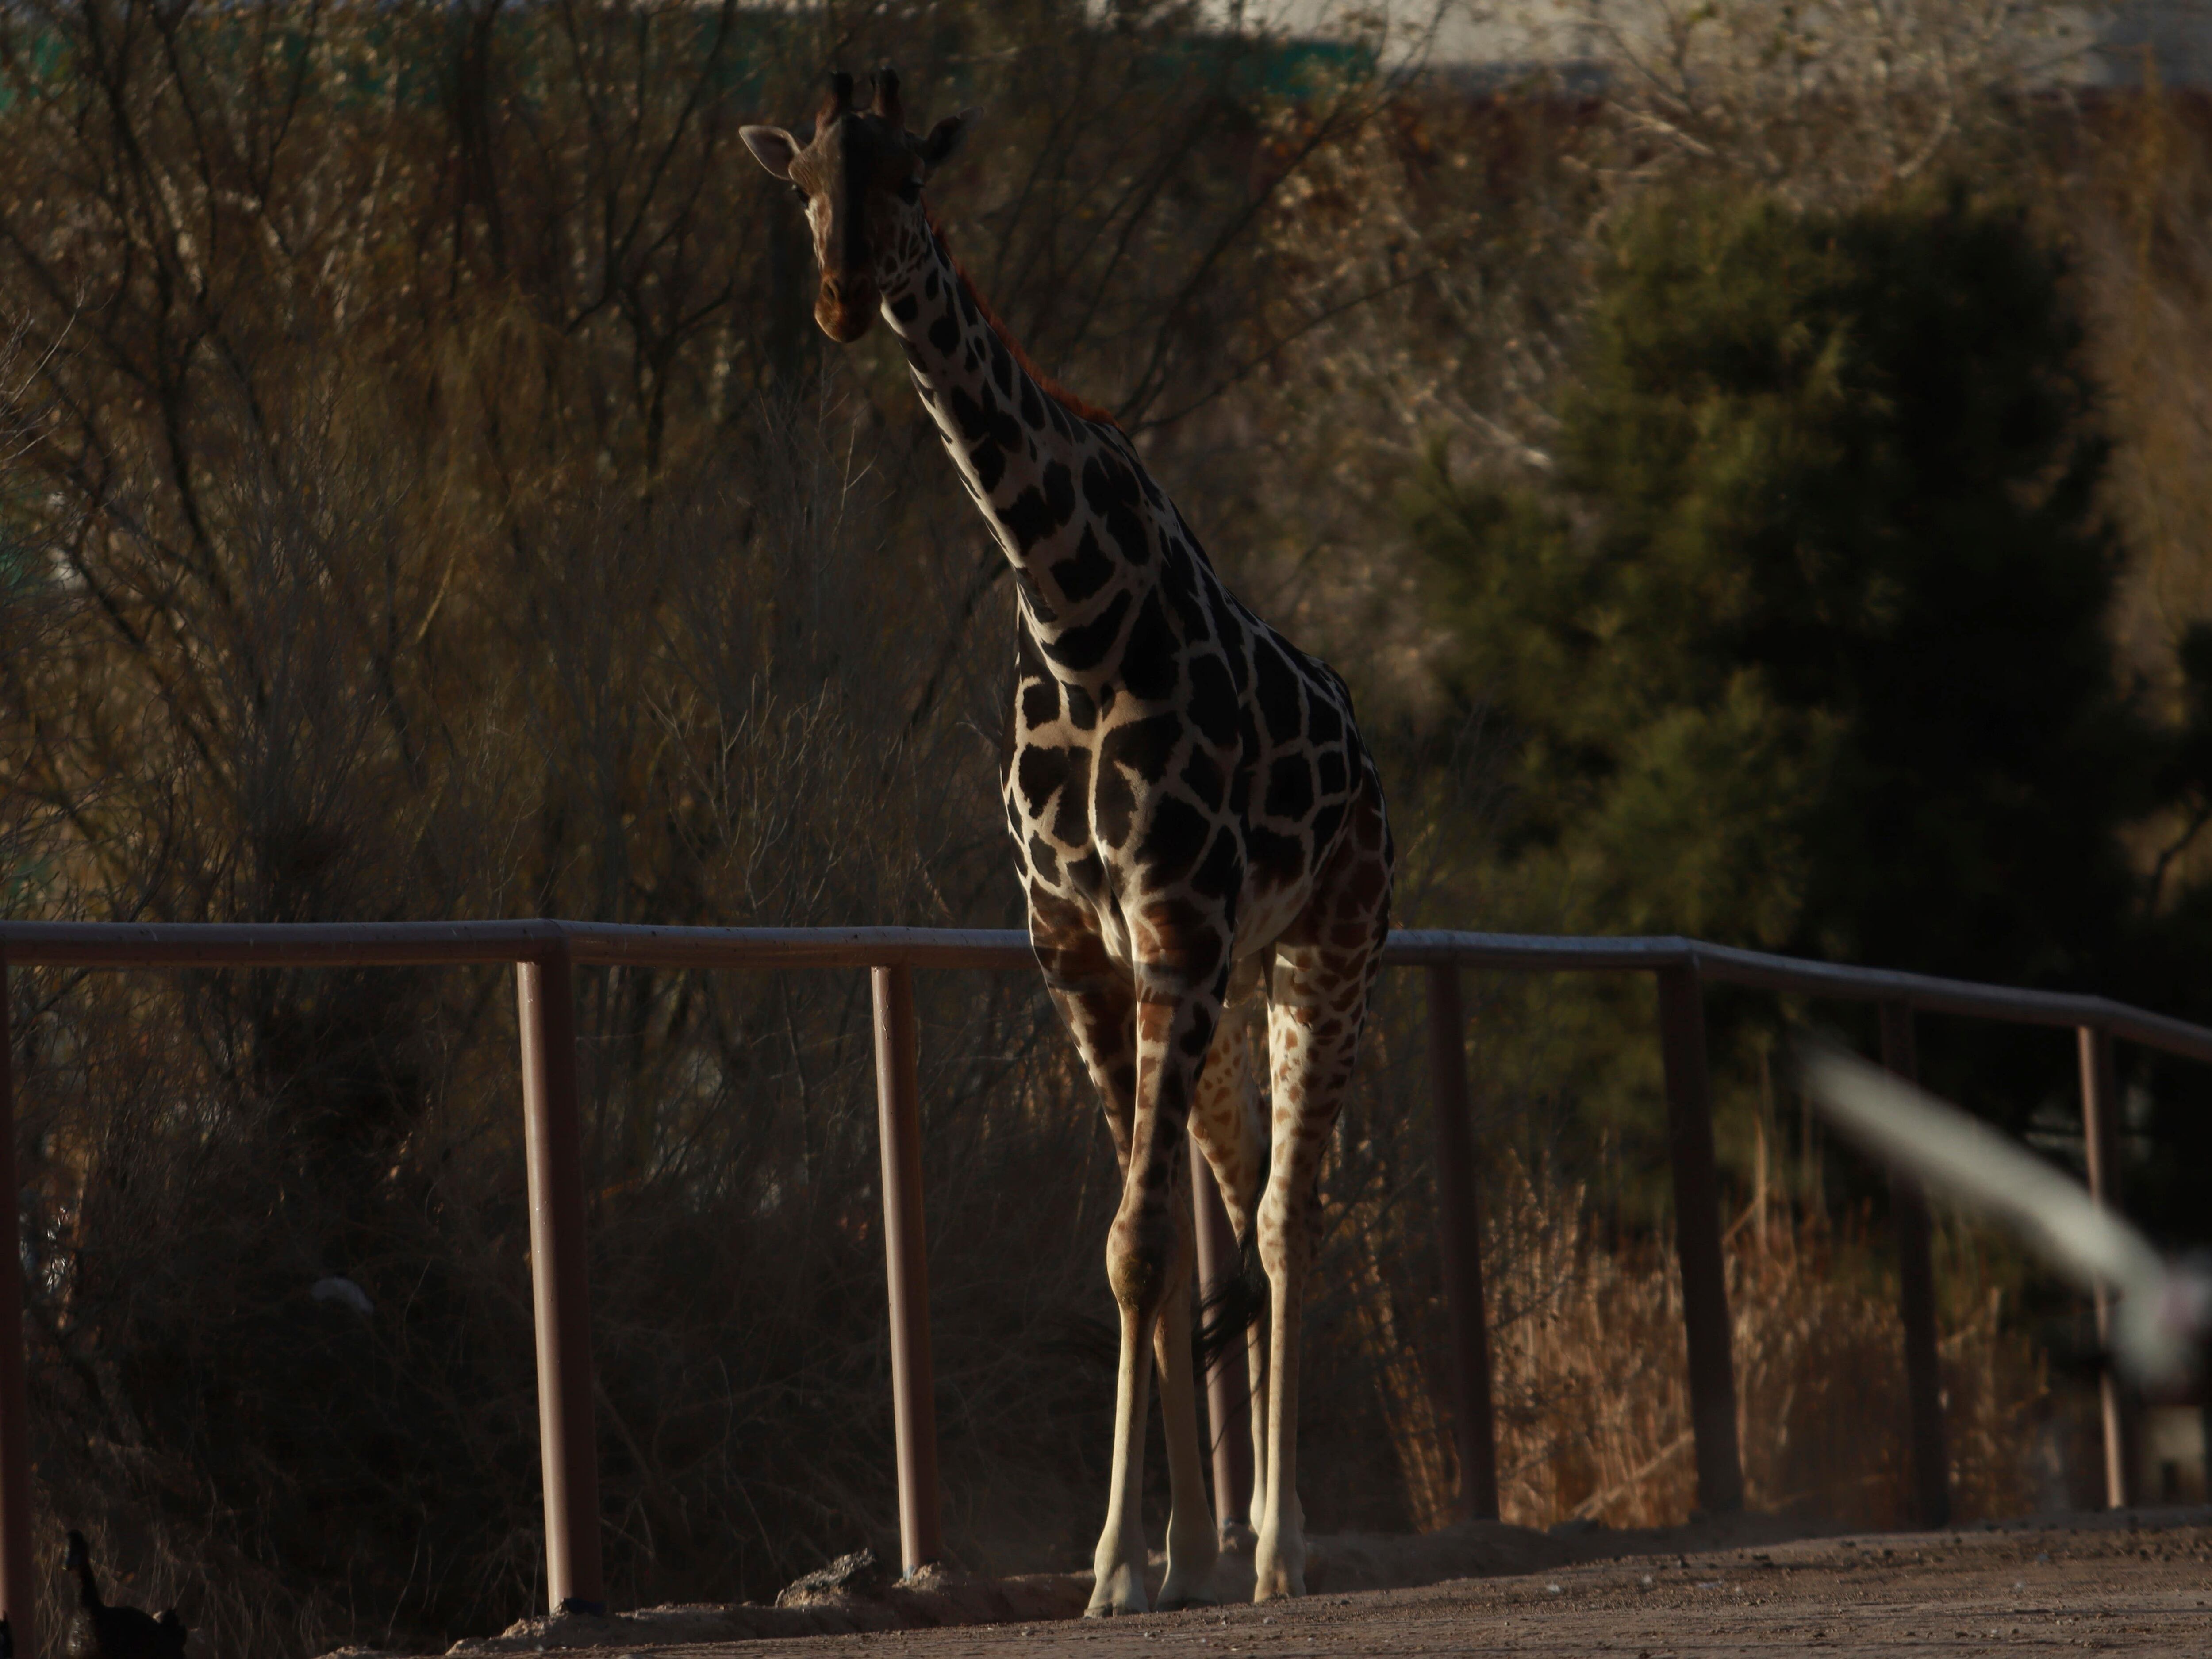 Benito the giraffe leaves extreme weather at Mexico’s border after campaign